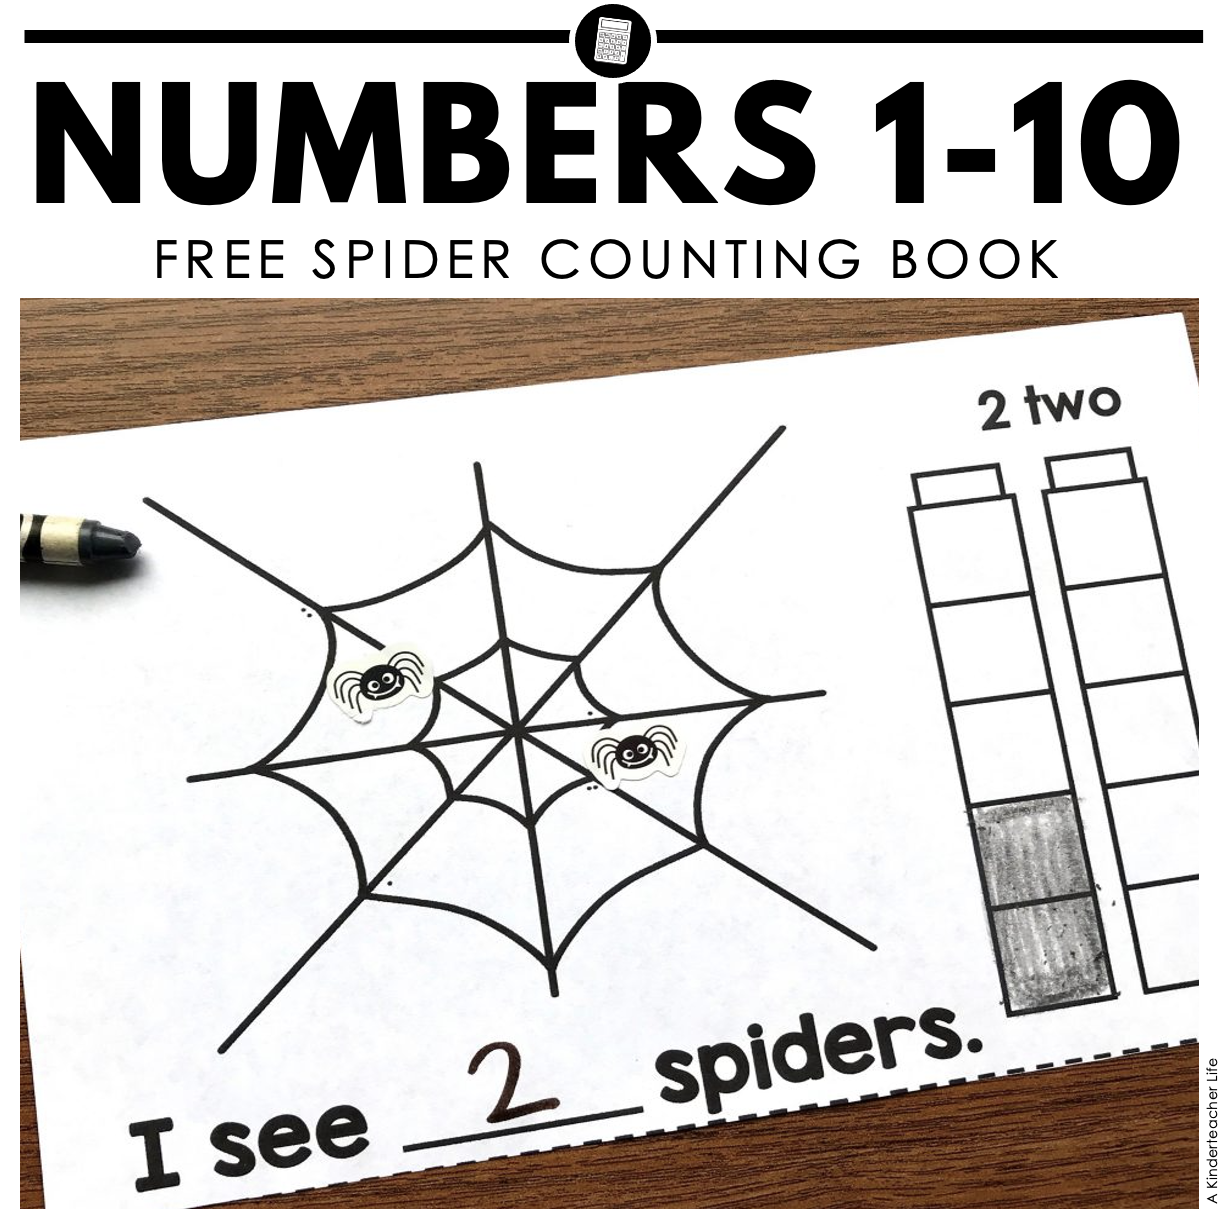 Counting Book – Halloween Version